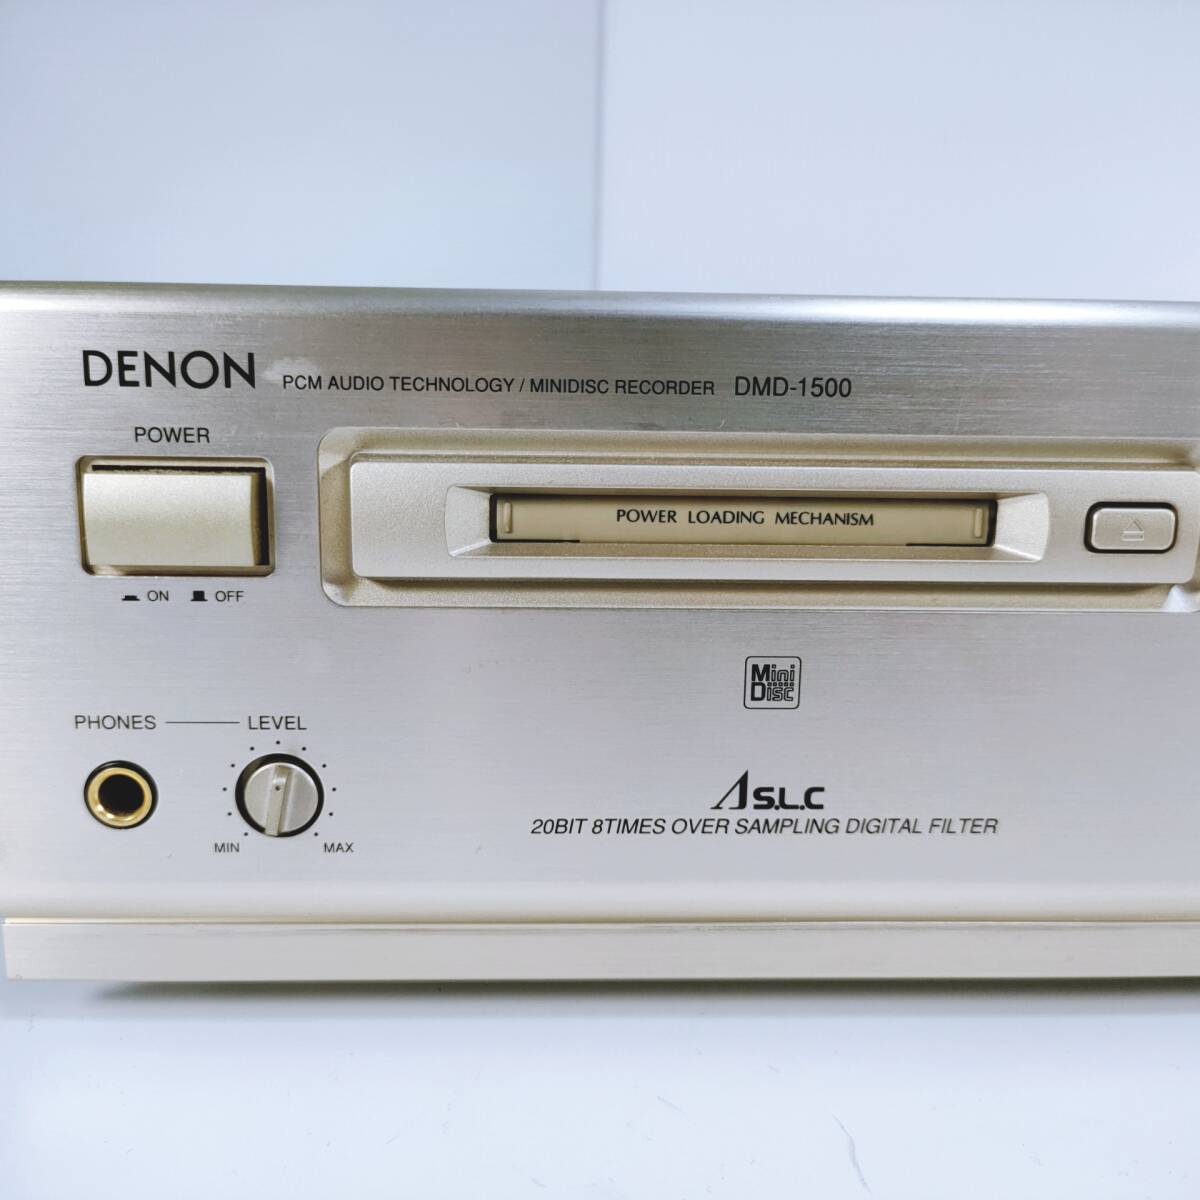  electrification has confirmed Junk DENON DMD-1500 Denon MD deck anonymity delivery 